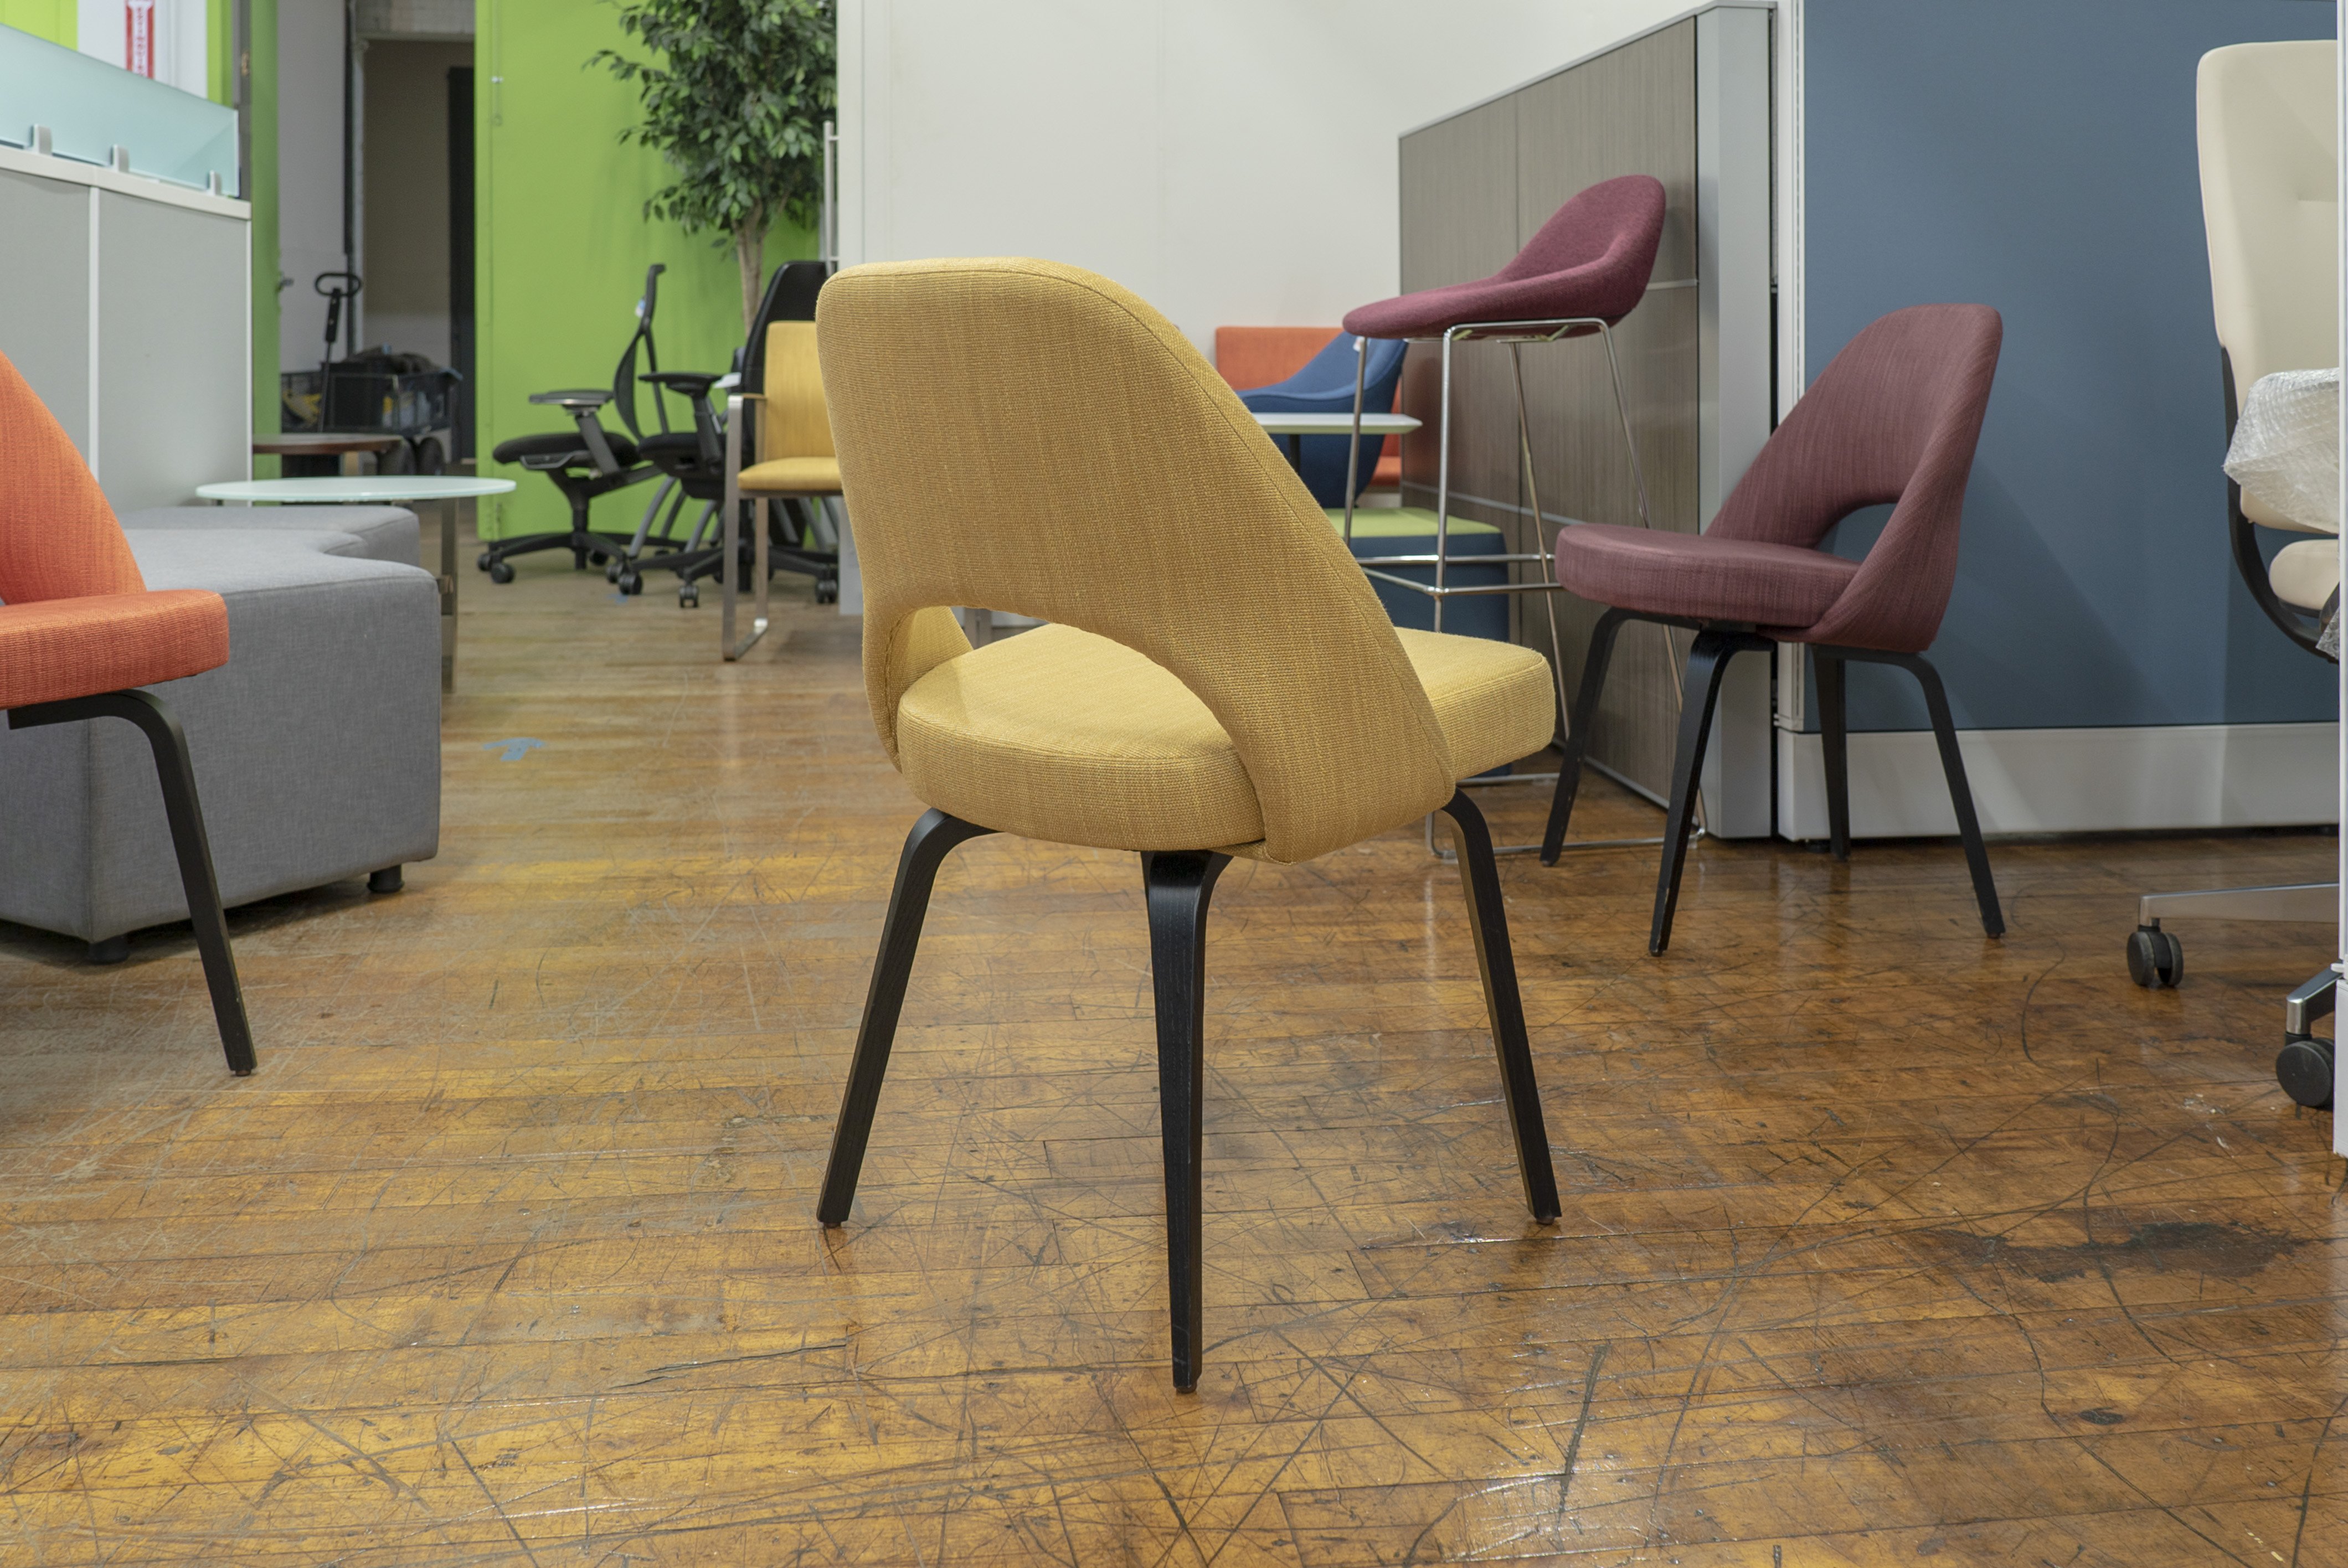 knoll-saarinen-guest-chairs-available-in-3-colors